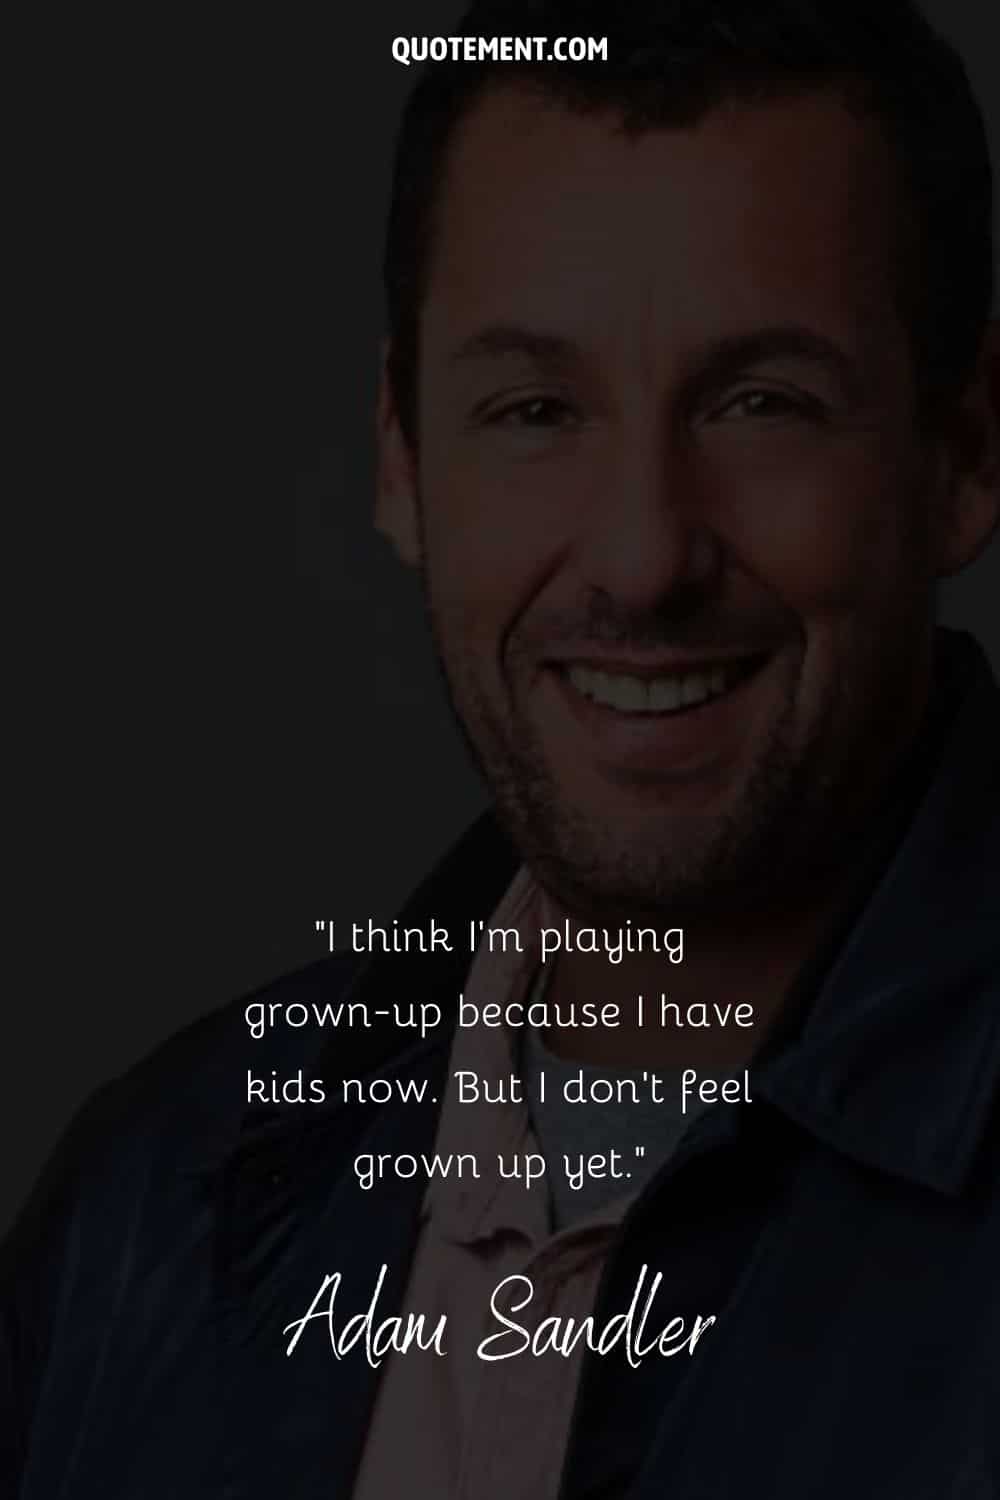 Funny positive quote by Adam Sandler about being an adult